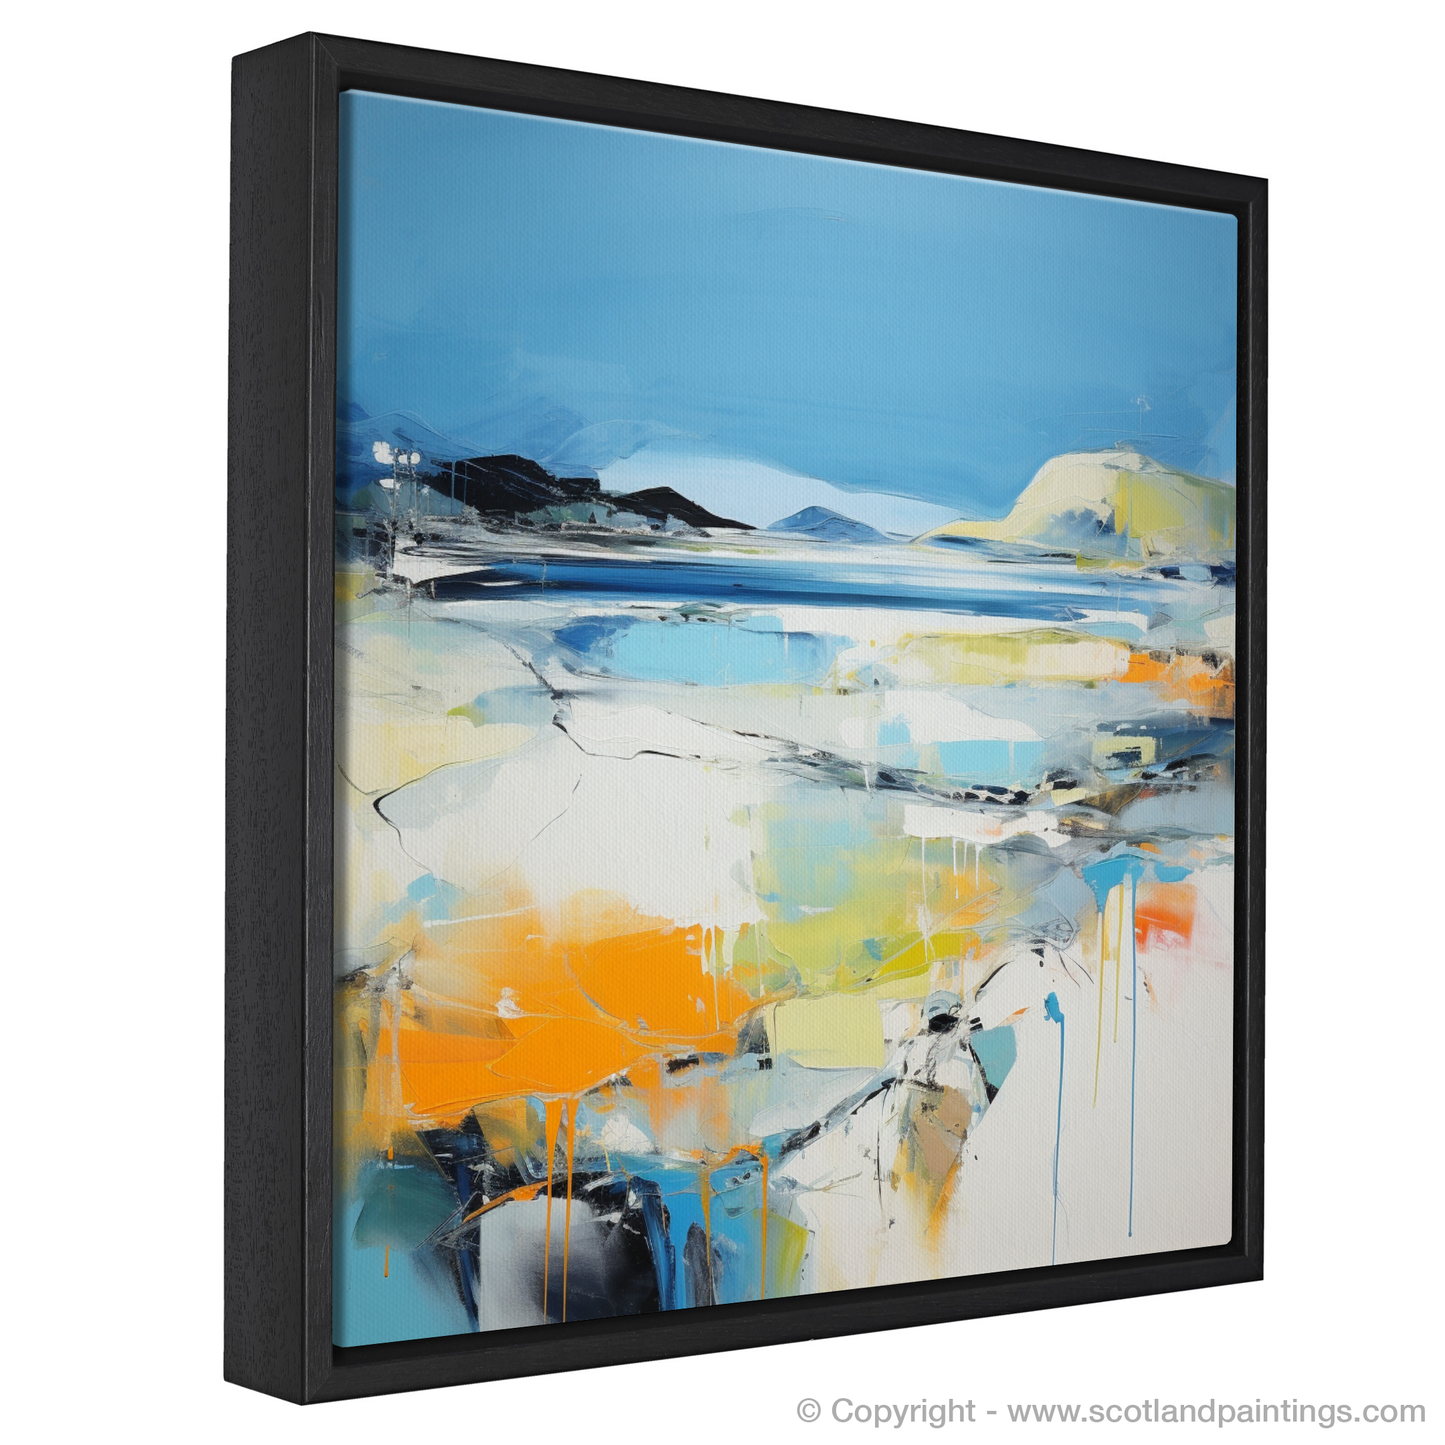 Painting and Art Print of Silver Sands of Morar in summer entitled "Scottish Summertime Abstract: Silver Sands of Morar".